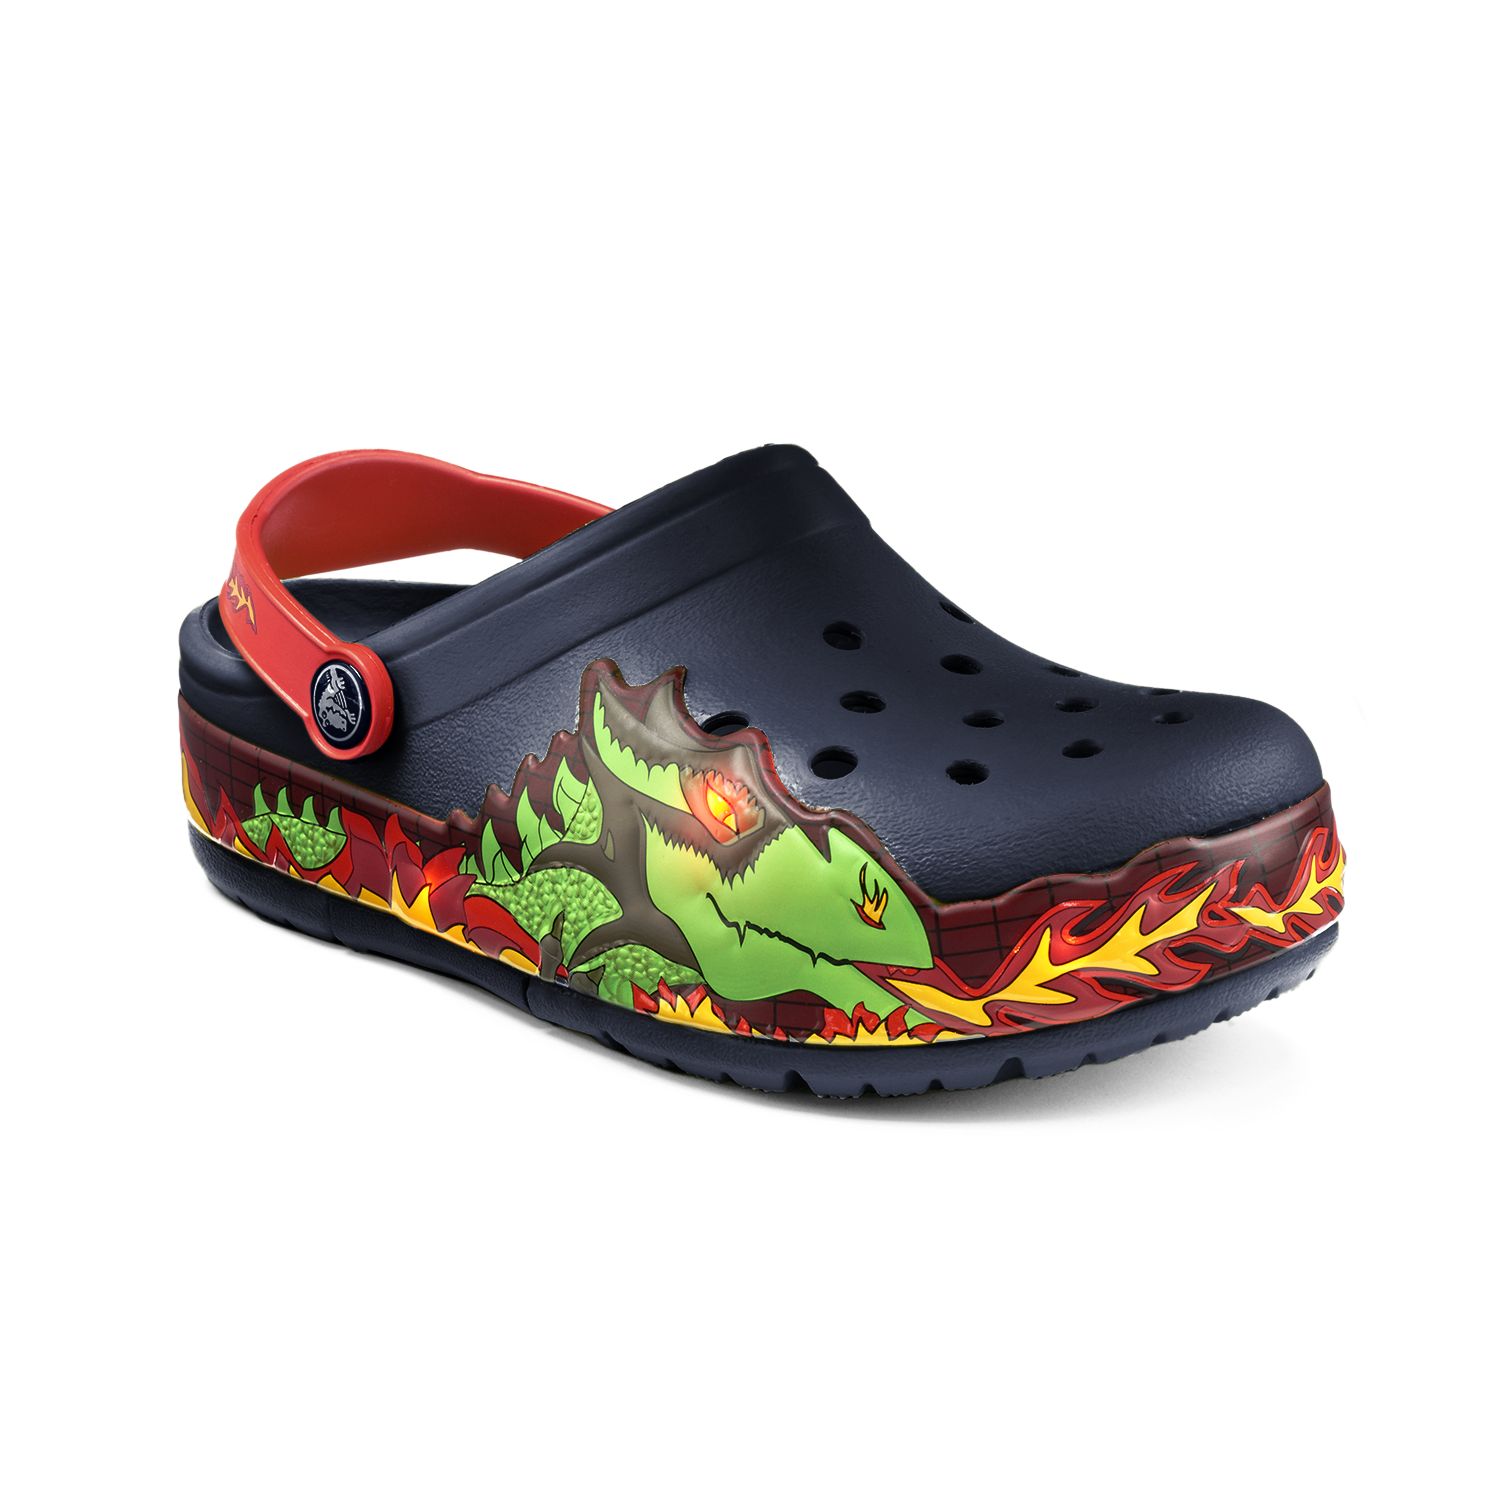 crocs with fire